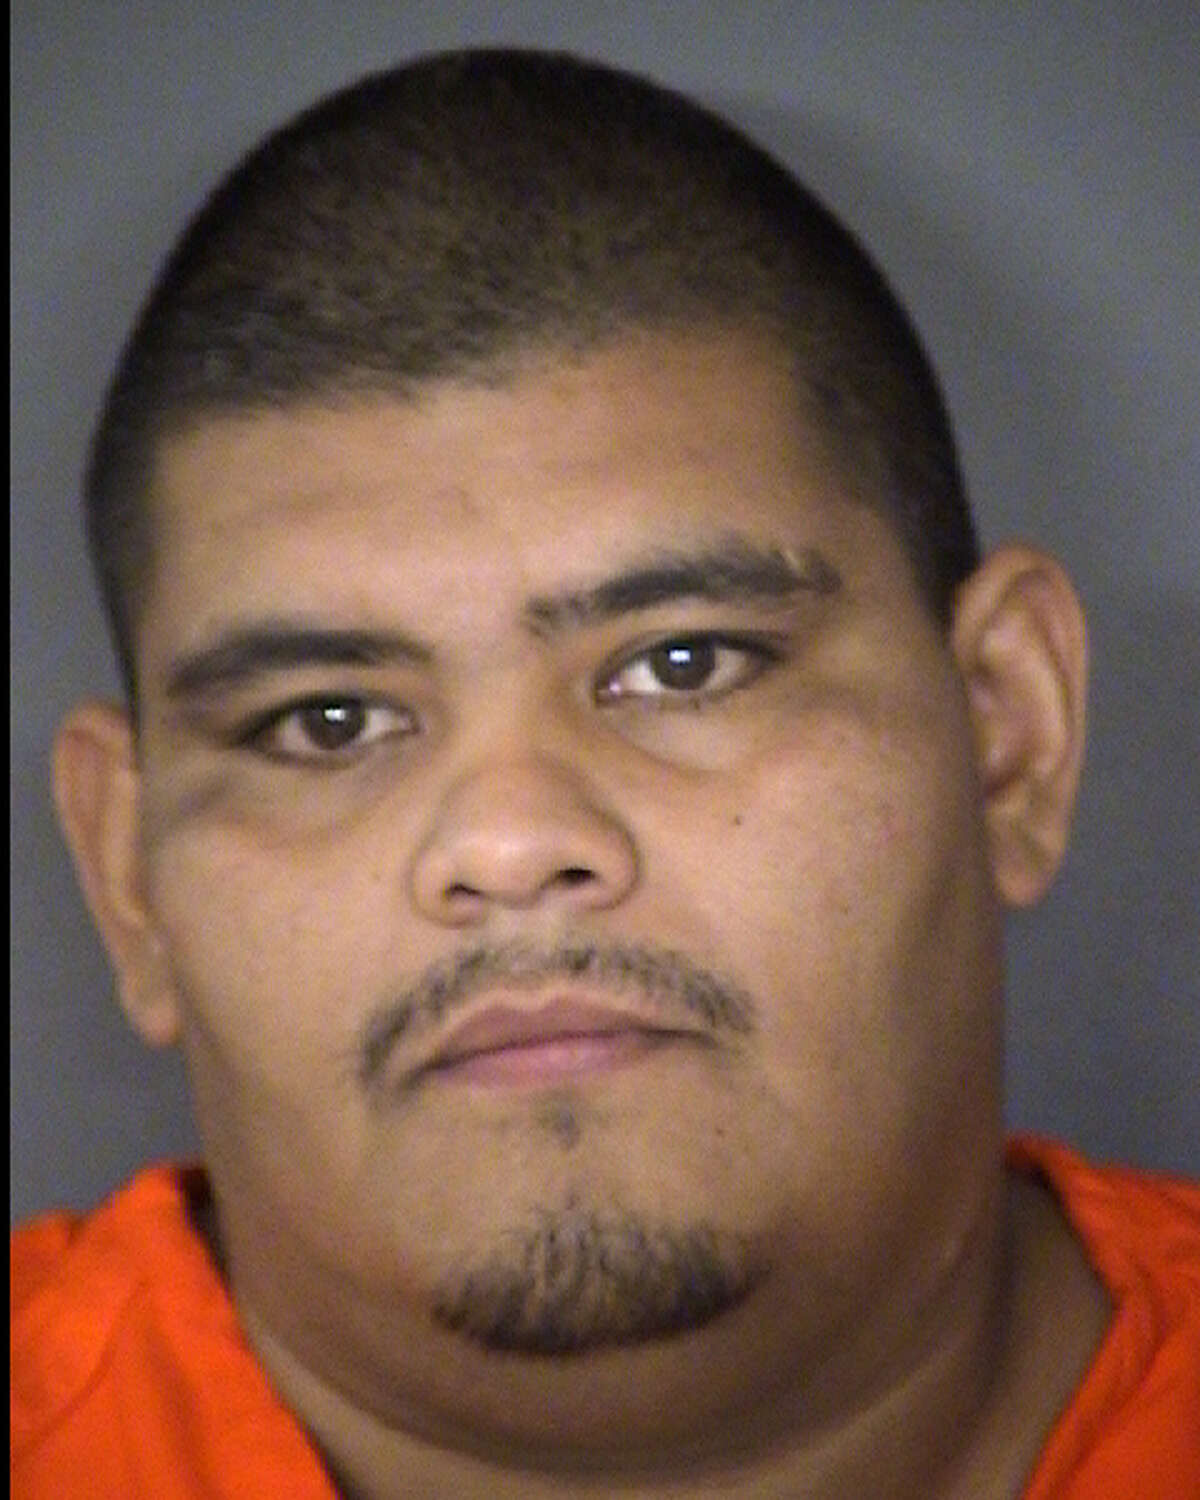 Larry Gallegos, 38, is facing charges of aggravated kidnapping and trafficking of persons.